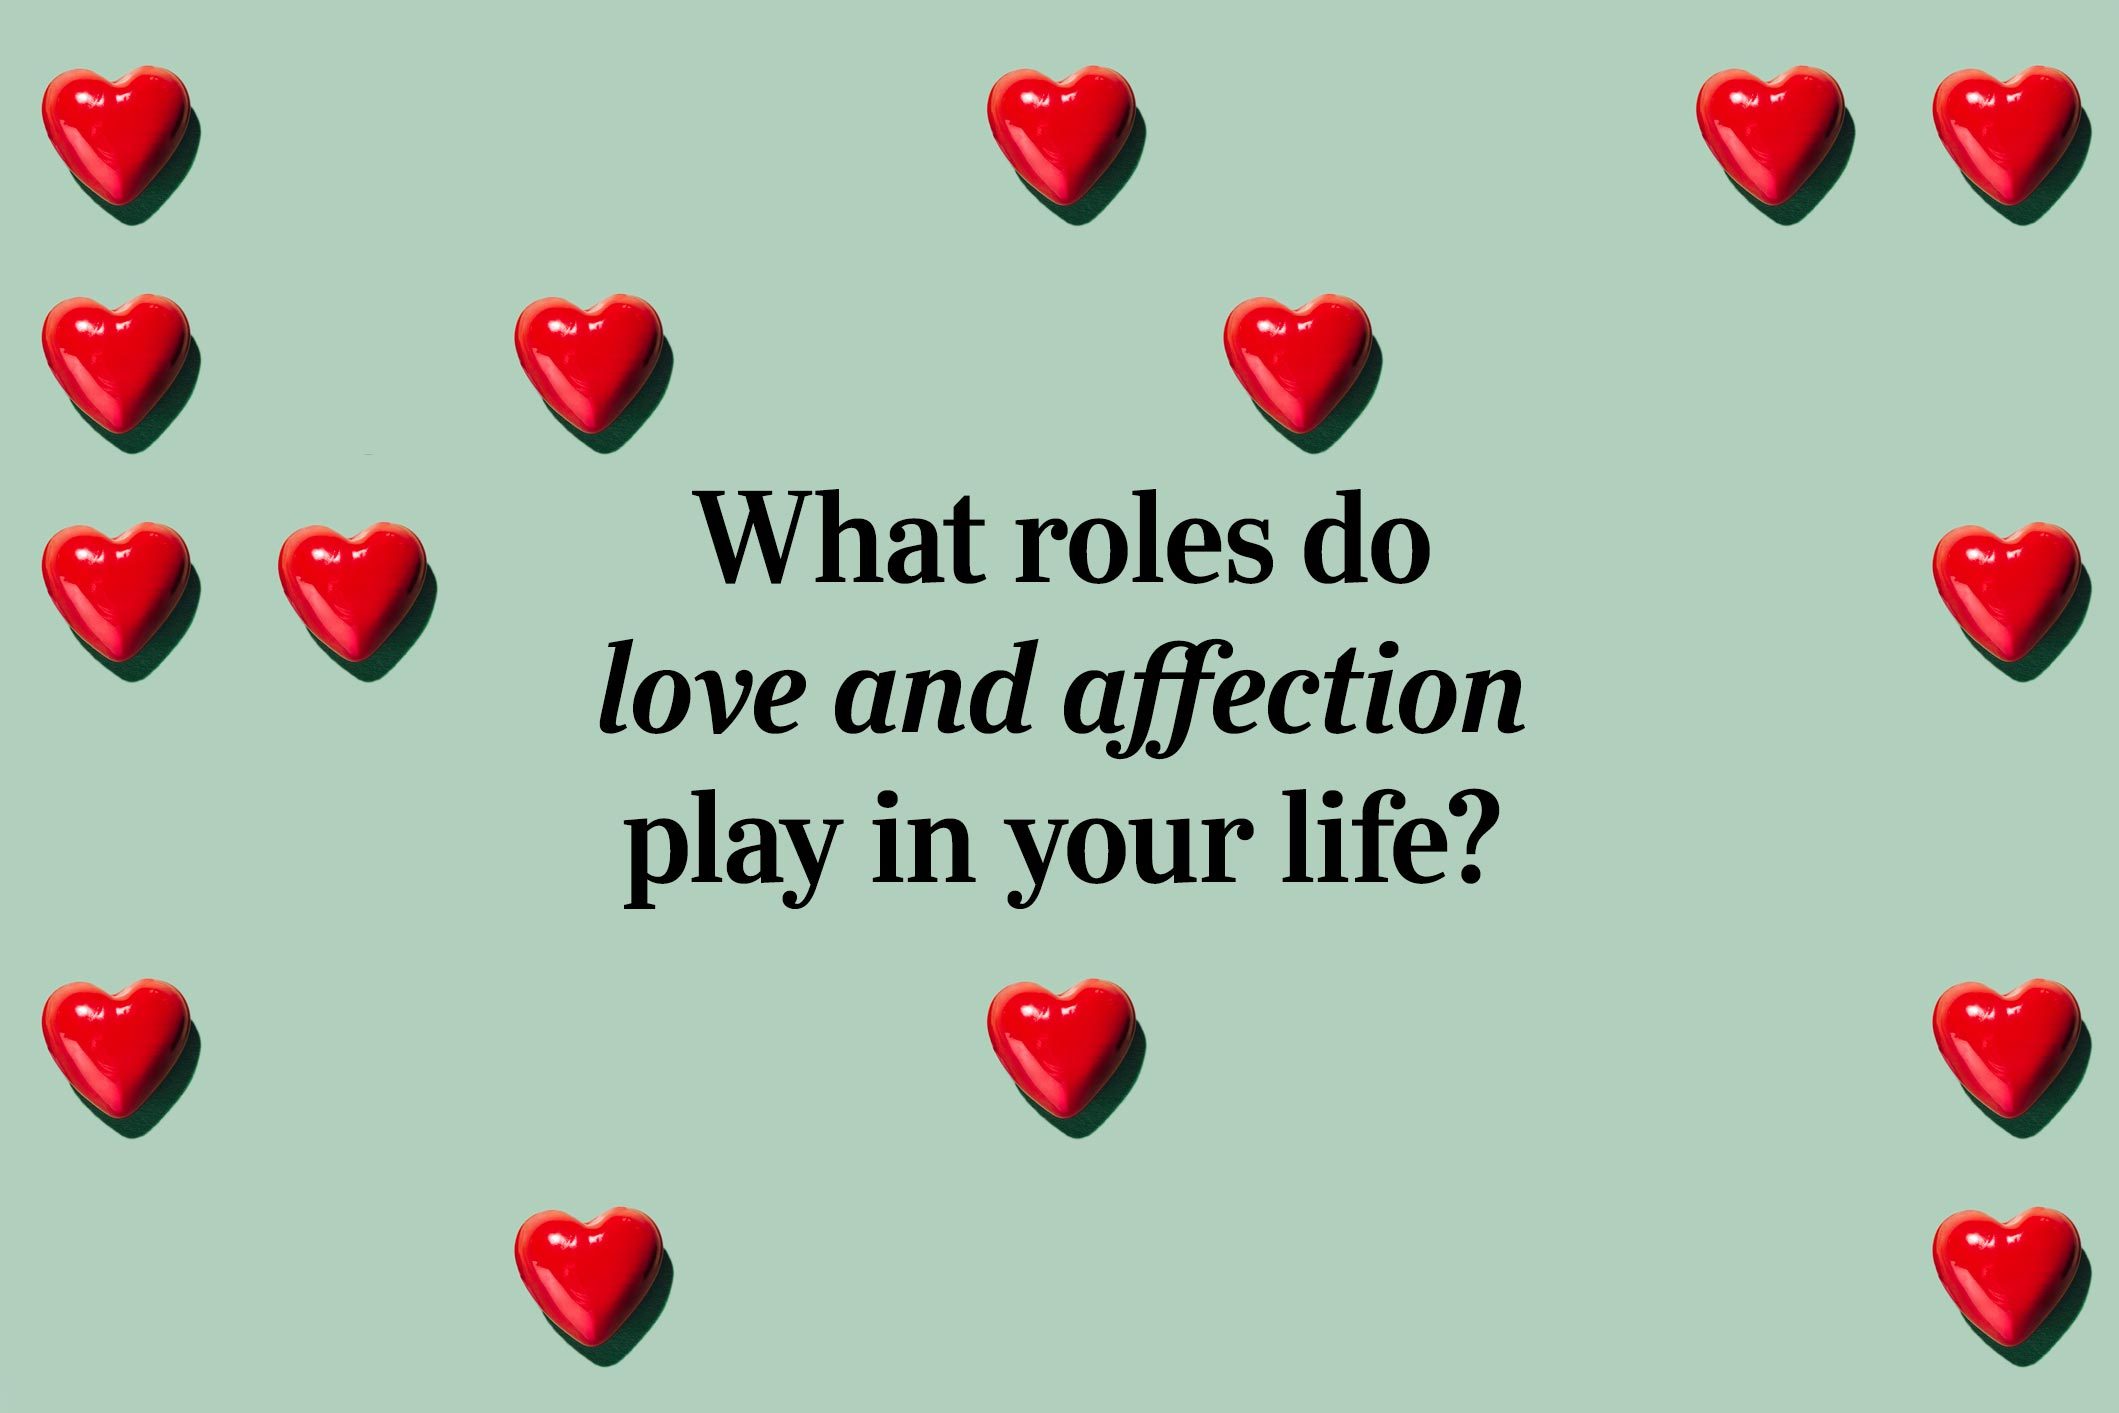 <p>What roles do love and affection play in your life?</p>